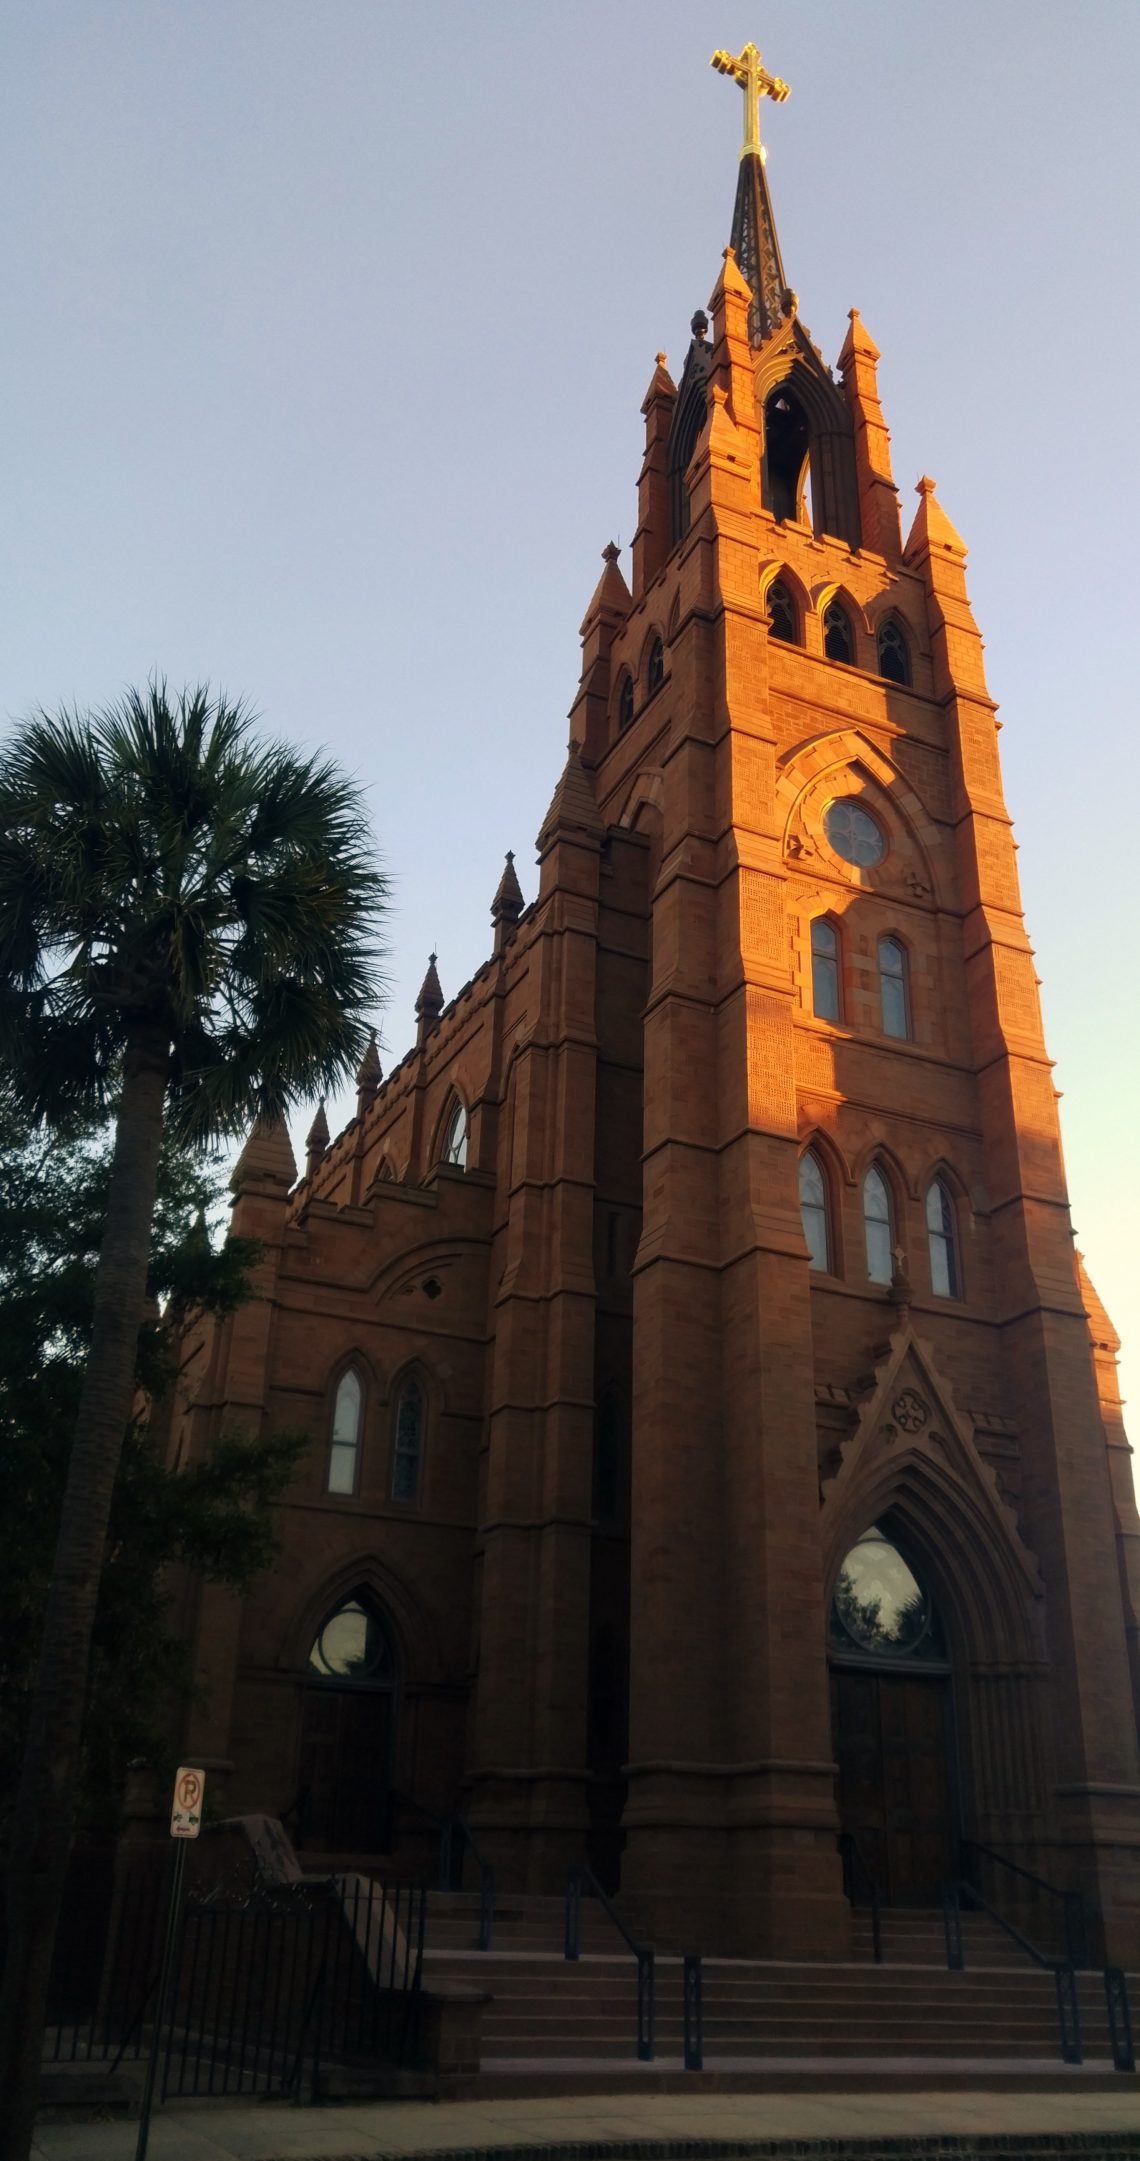 The early morning sun hitting the steeple of the Cathedral of St. John the Baptist on Broad Street in Charleston.